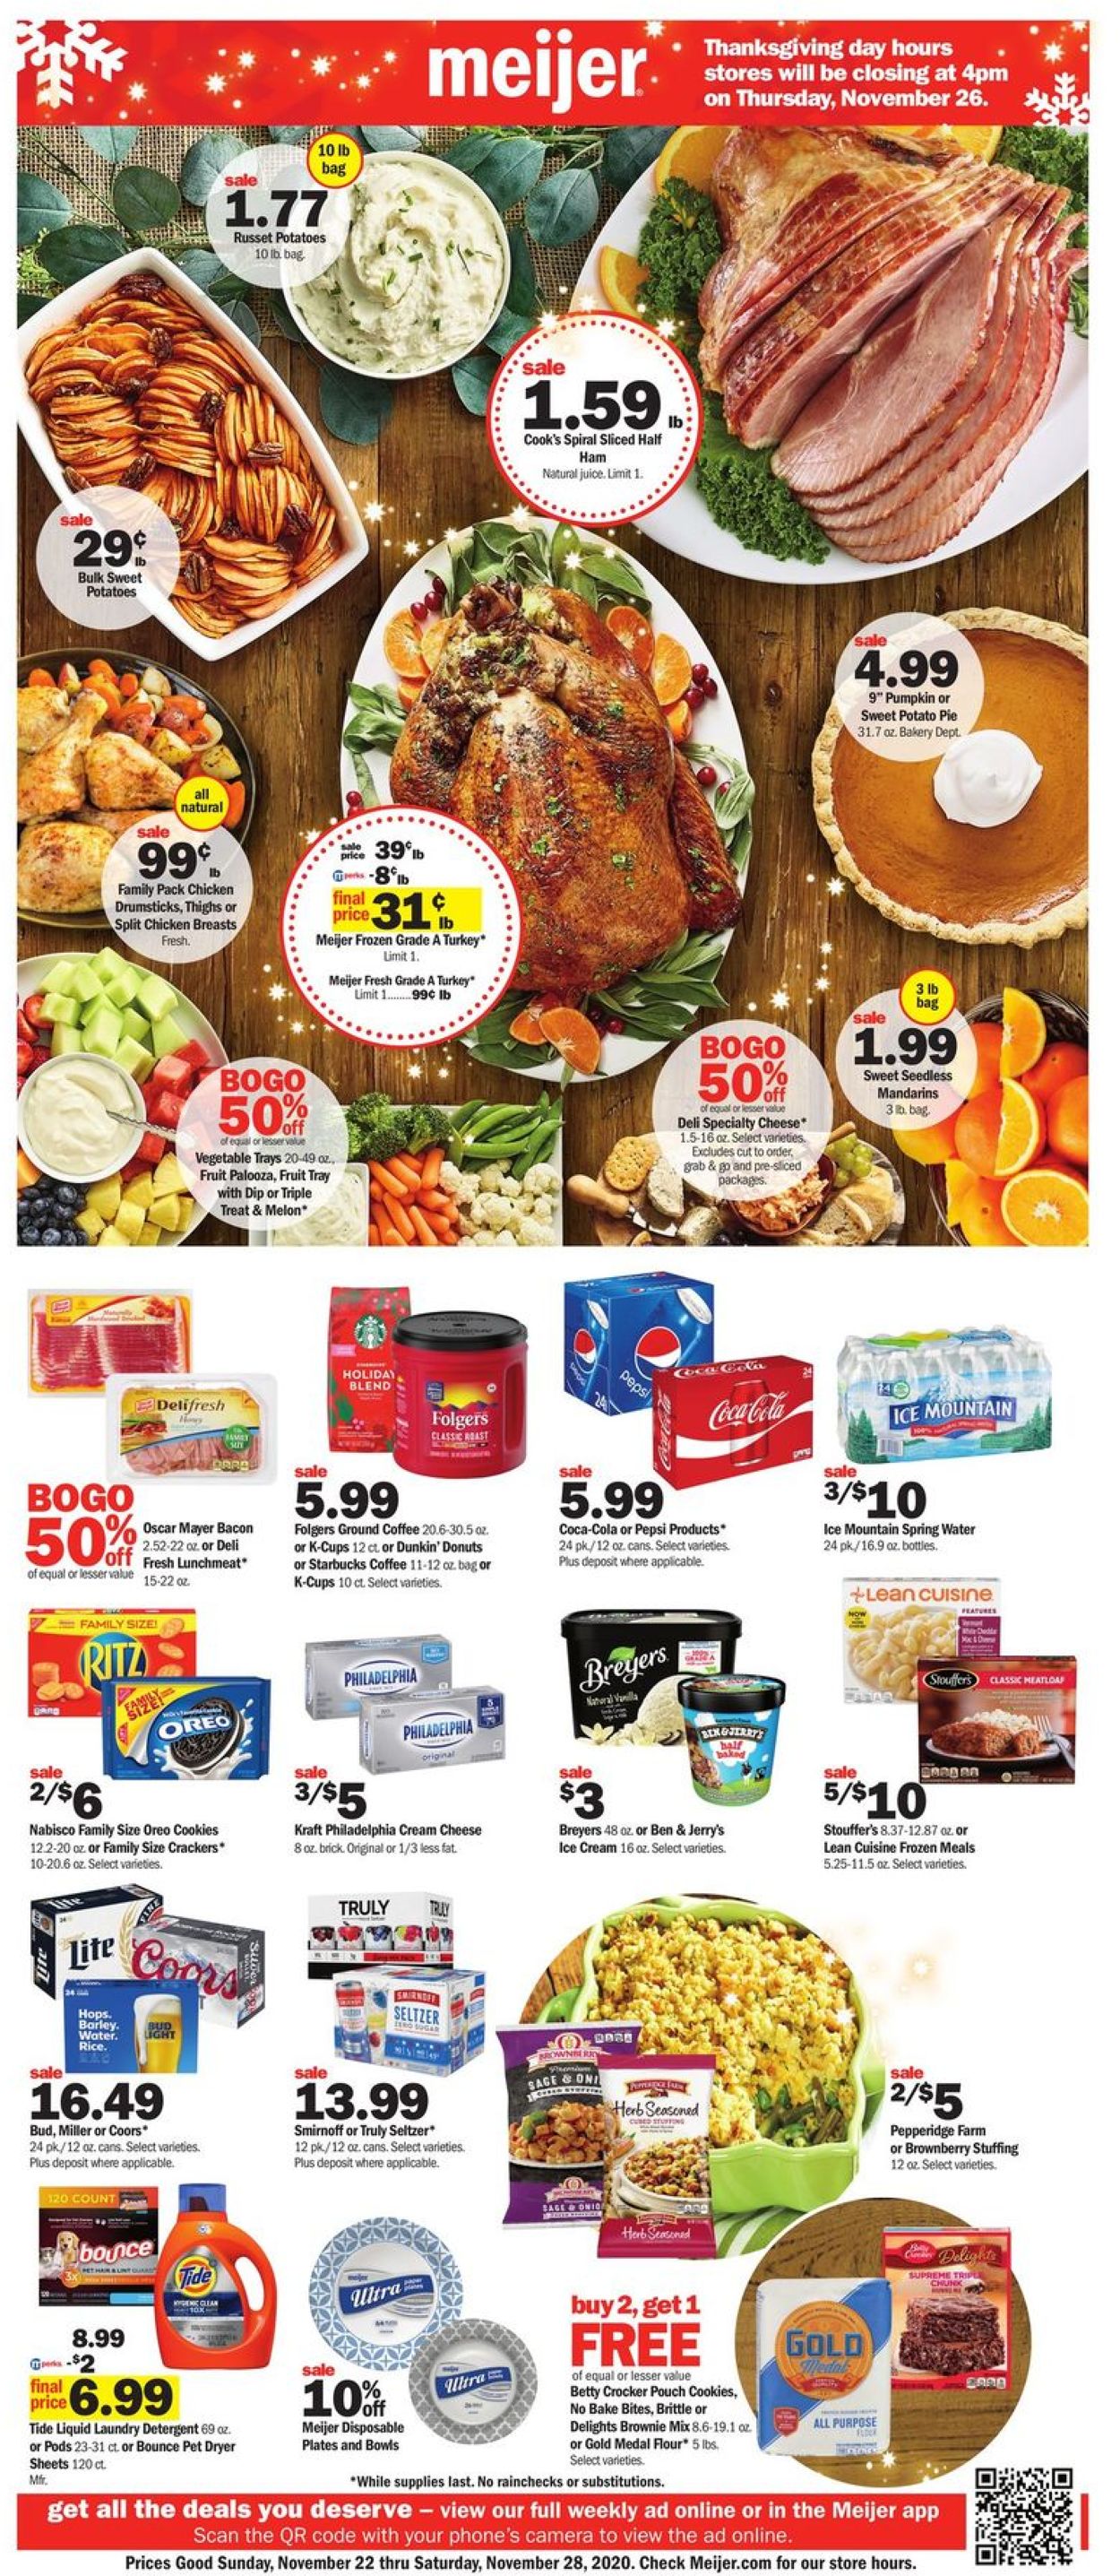 Meijer - Black Friday Ad 2020 Current weekly ad 11/22 - 11/28/2020 ...